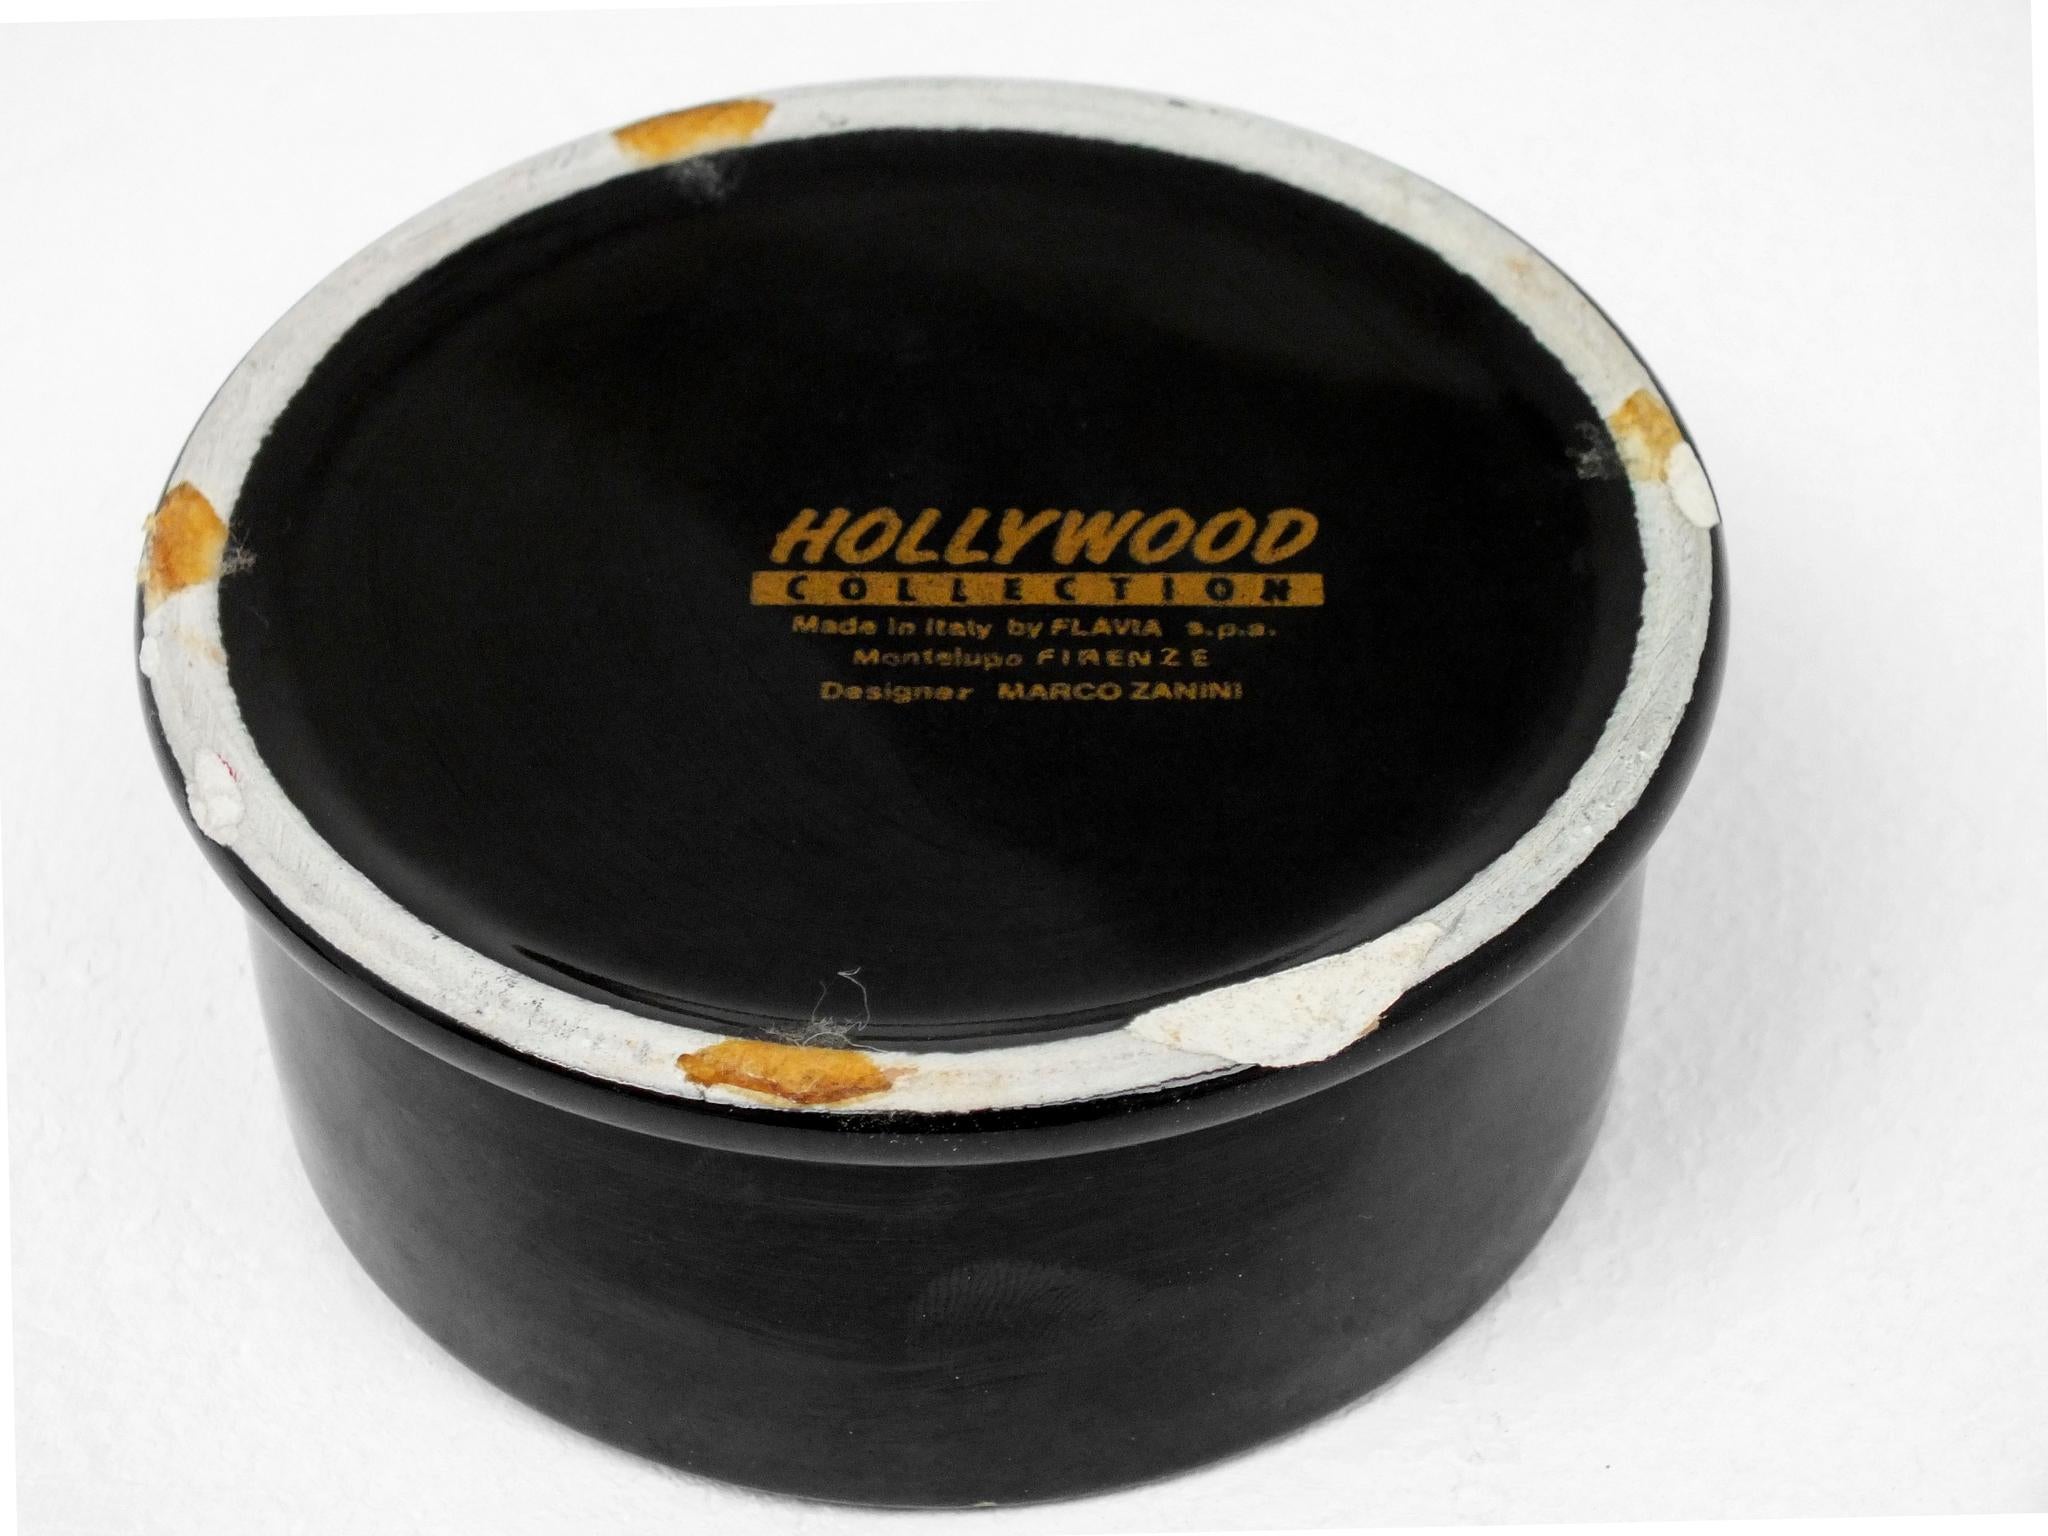 Marco Zanini for Hollywood collection by Flavia Montelupo, ceramic years 80.

 Measure h 4 inches x diam 5